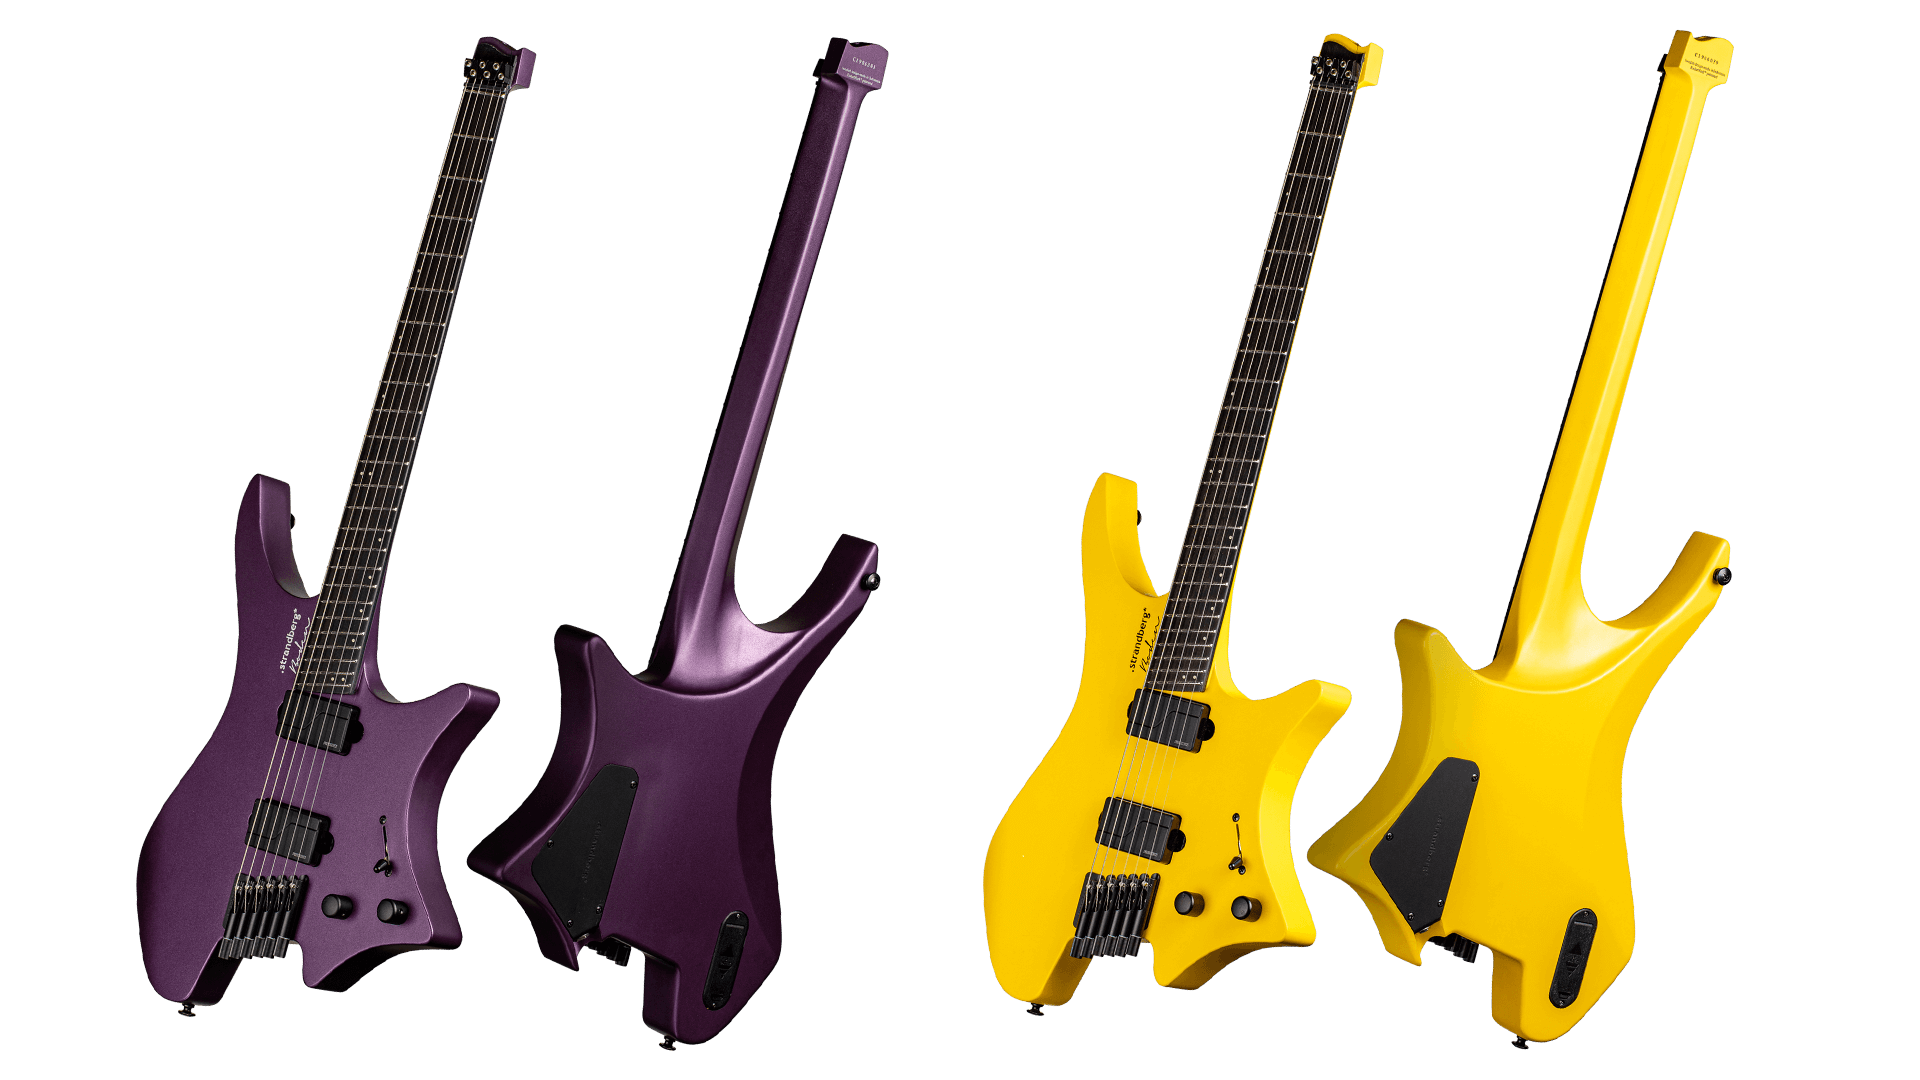 Headless Guitar Boden Metal purple and yellow front view